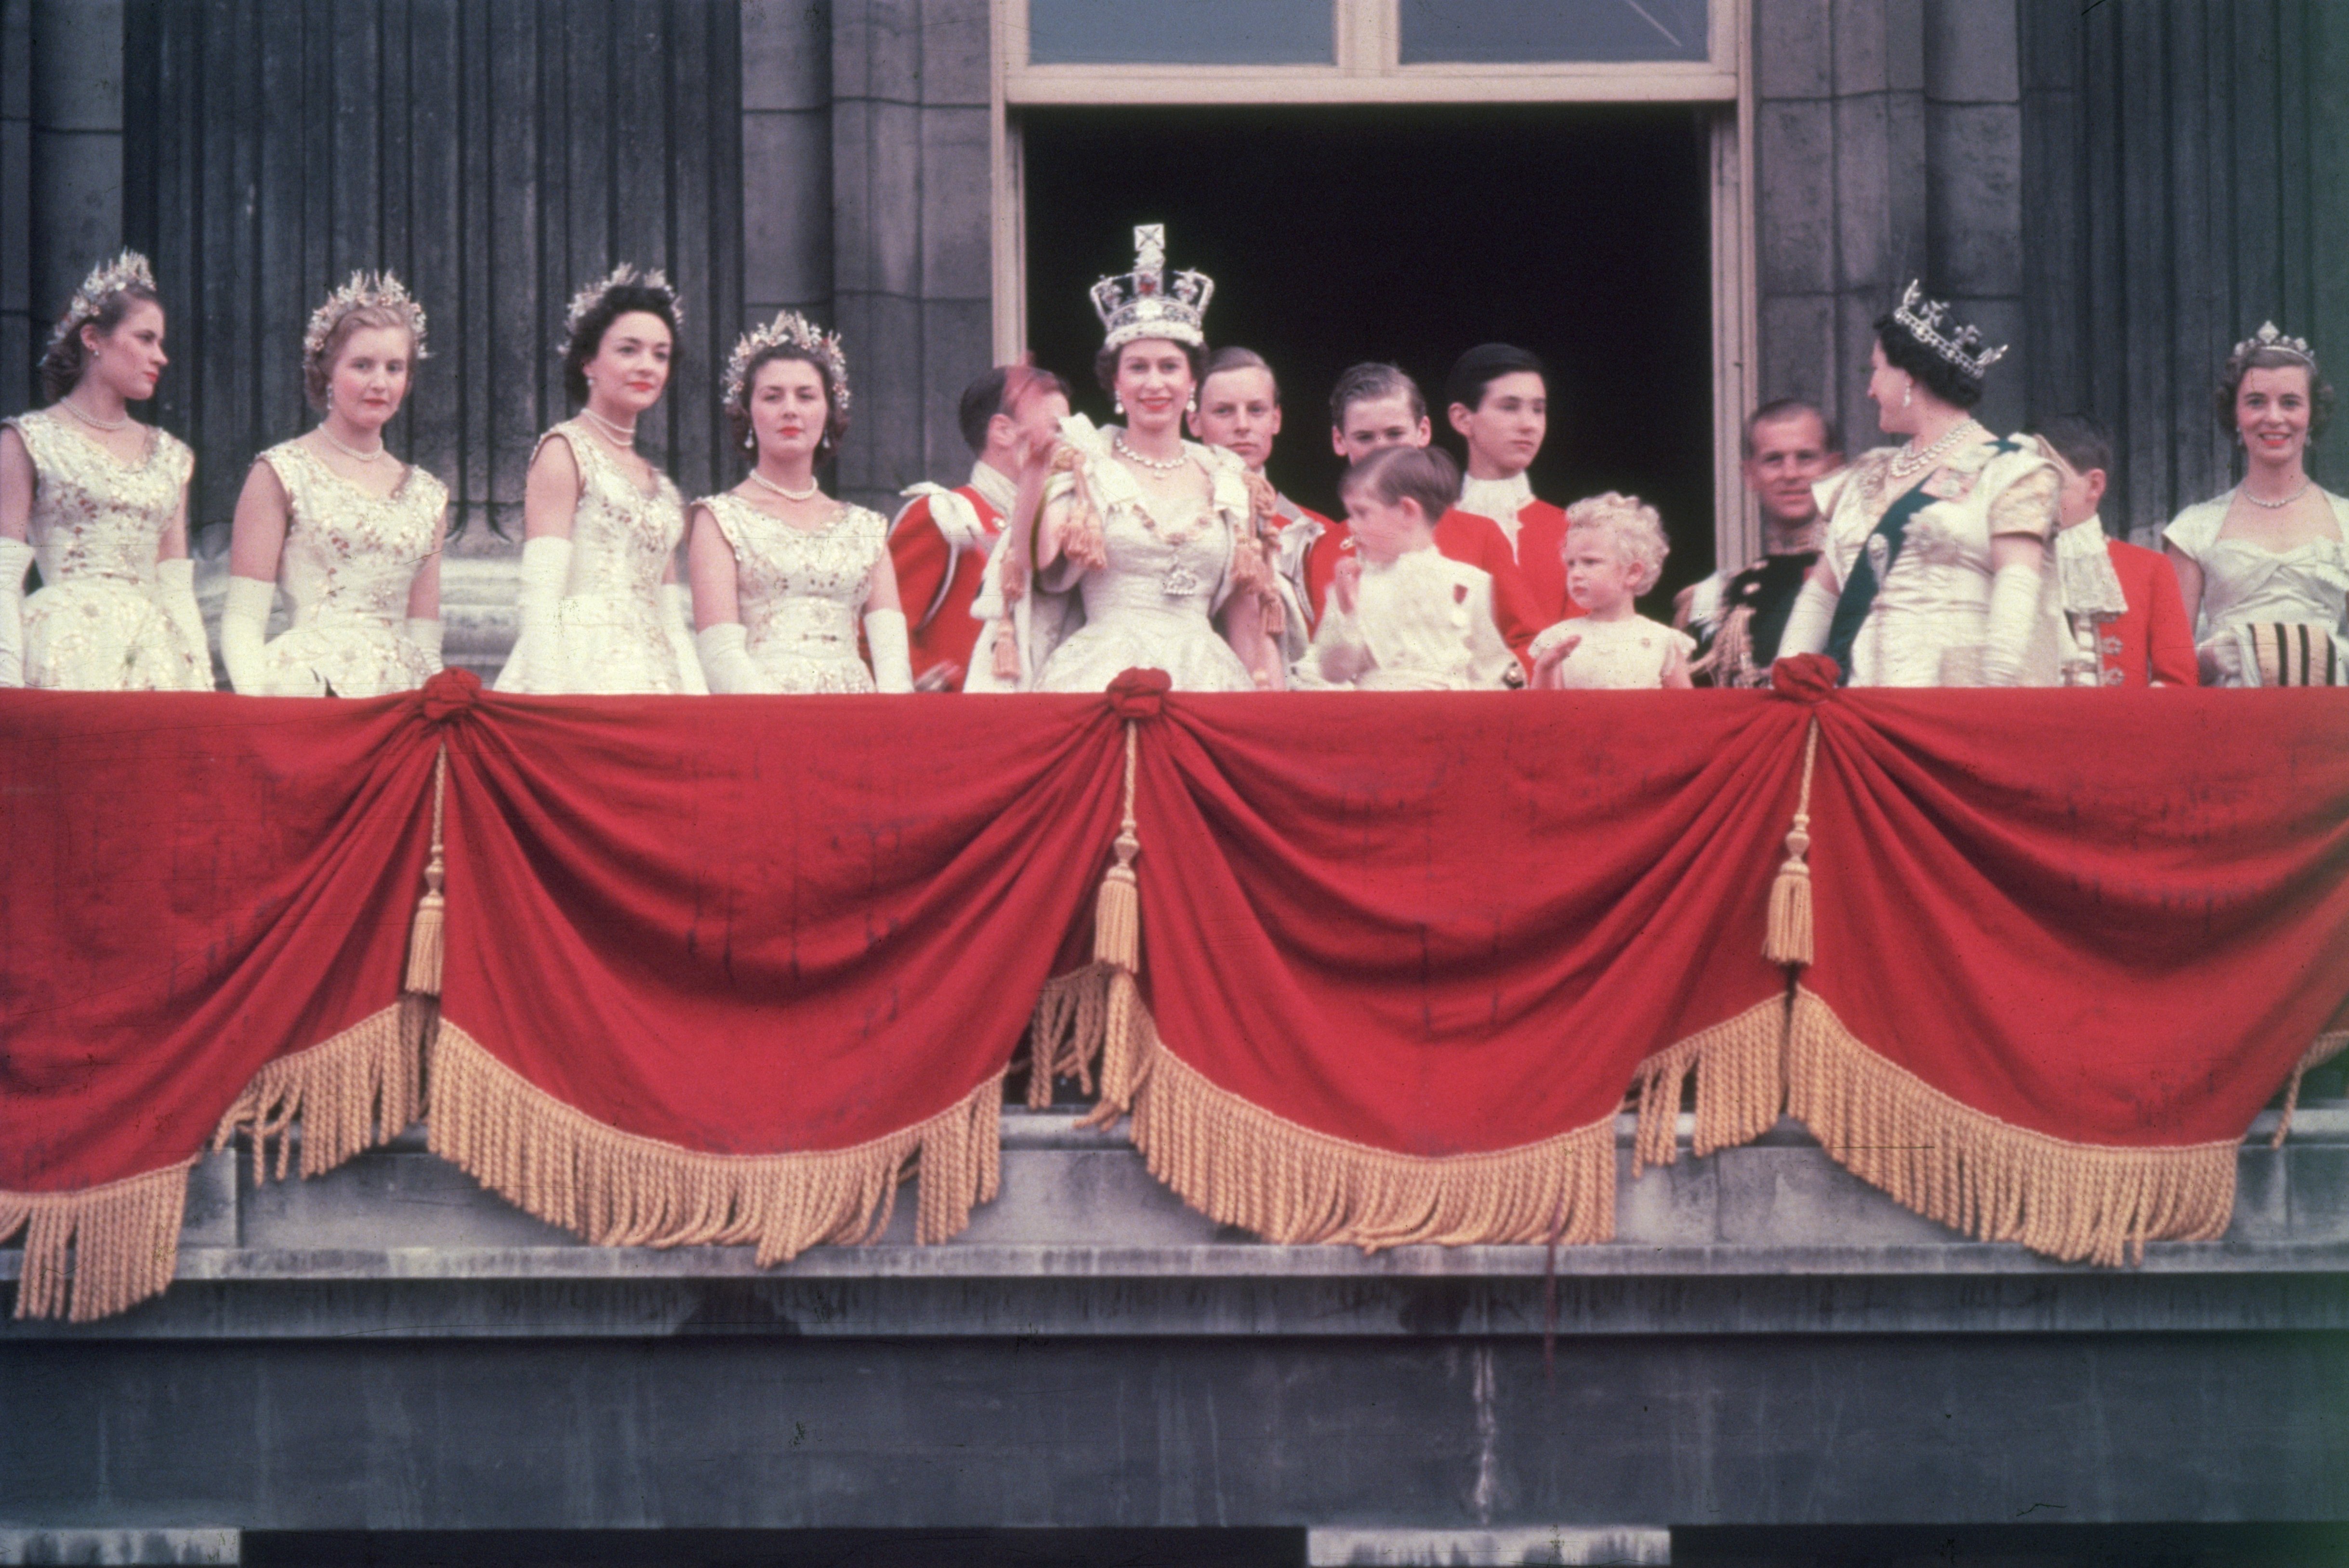  The newly crowned Queen Elizabeth II waves to the crowd from the balcony at Buckingham Palace. Her children Prince Charles and Princess Anne stand with her in 1953 | Photo: Getty Images